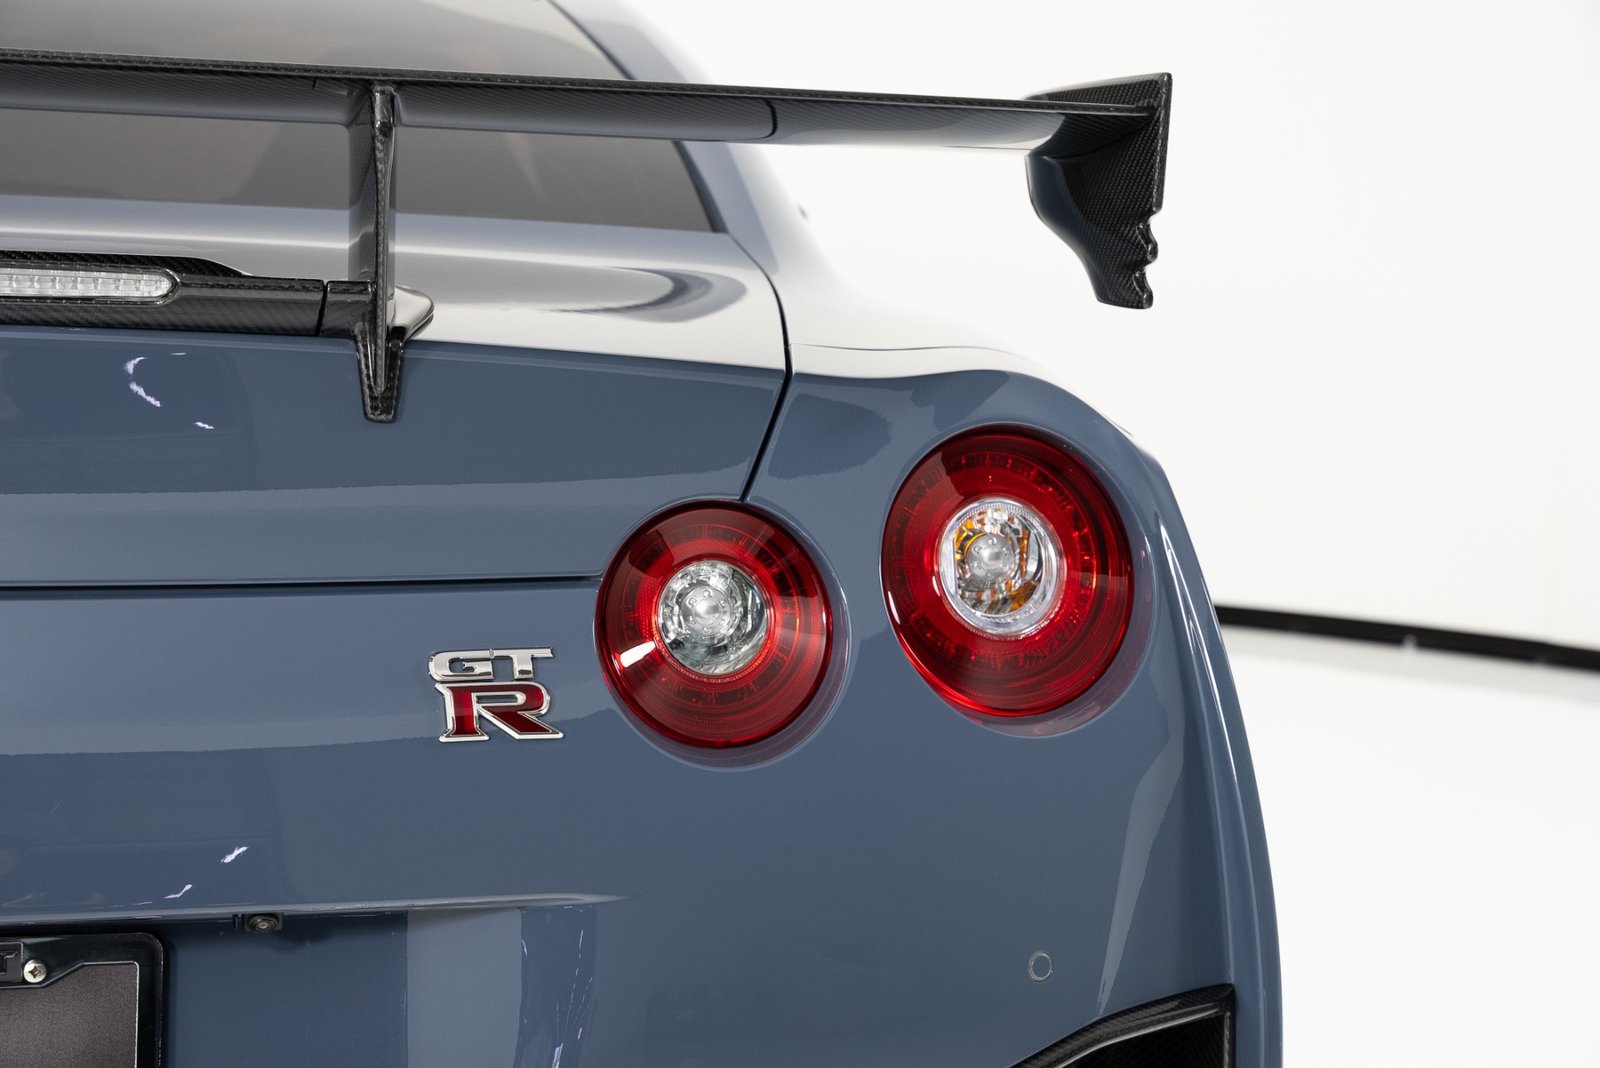 New 2021 NISSAN GT-R NISMO SPECIAL EDITION (32)